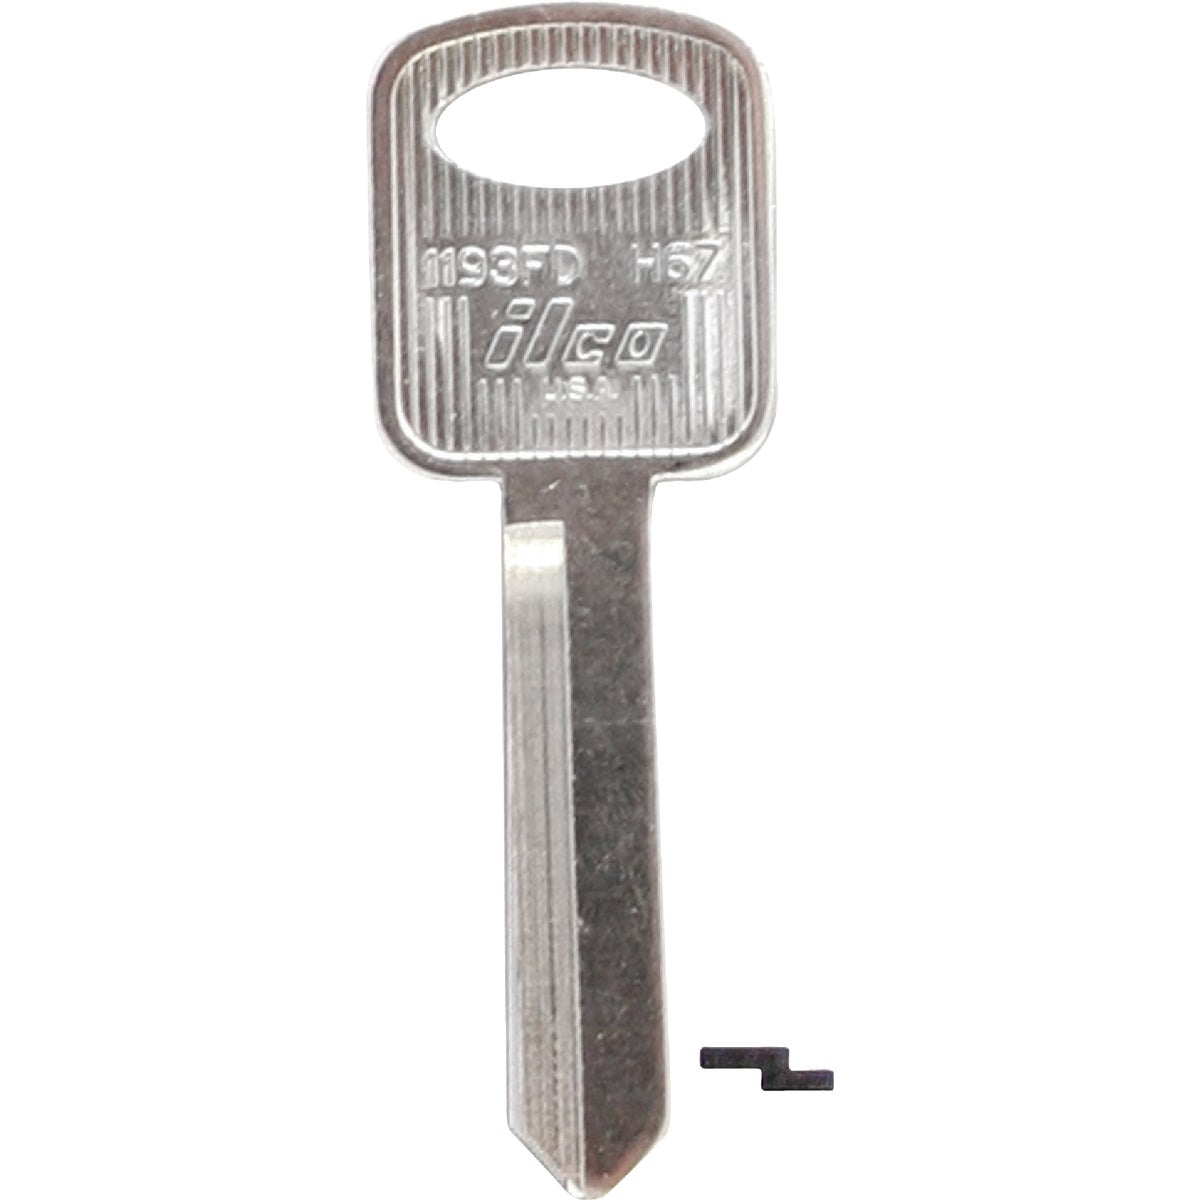 ILCO Ford Nickel Plated Automotive Key, H67 / 1193FD (10-Pack)